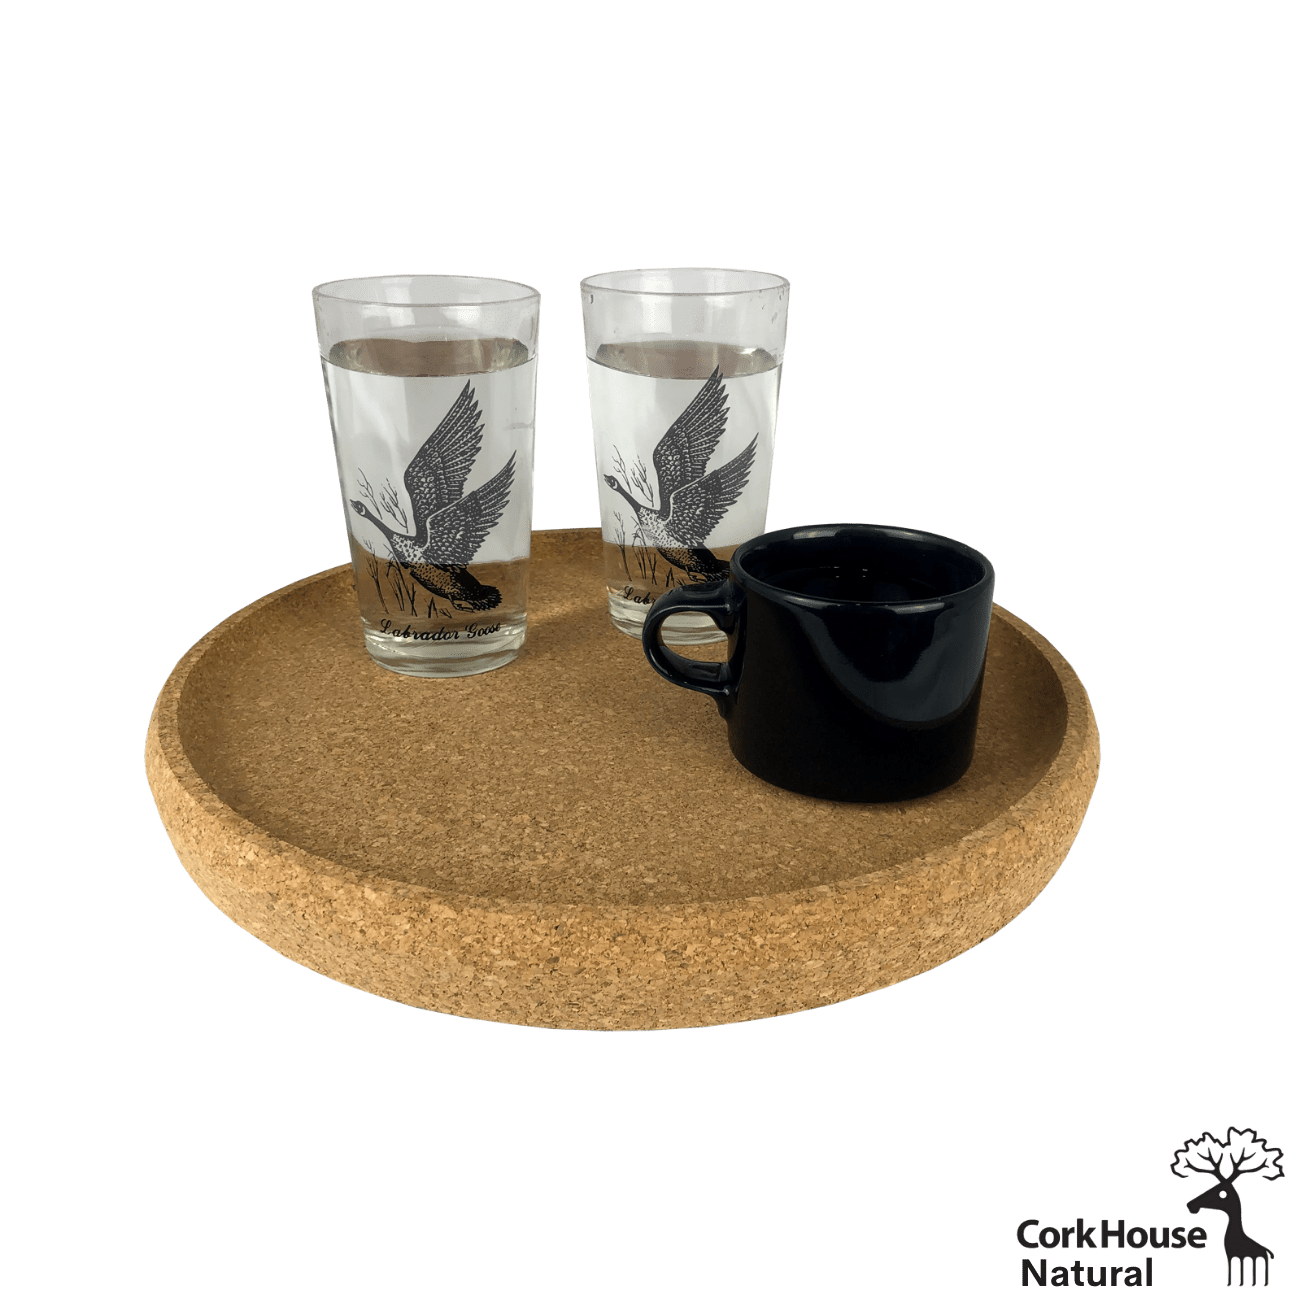 The natural cork tray with raised lip holds two clear glasses of water and a black coffee mug.